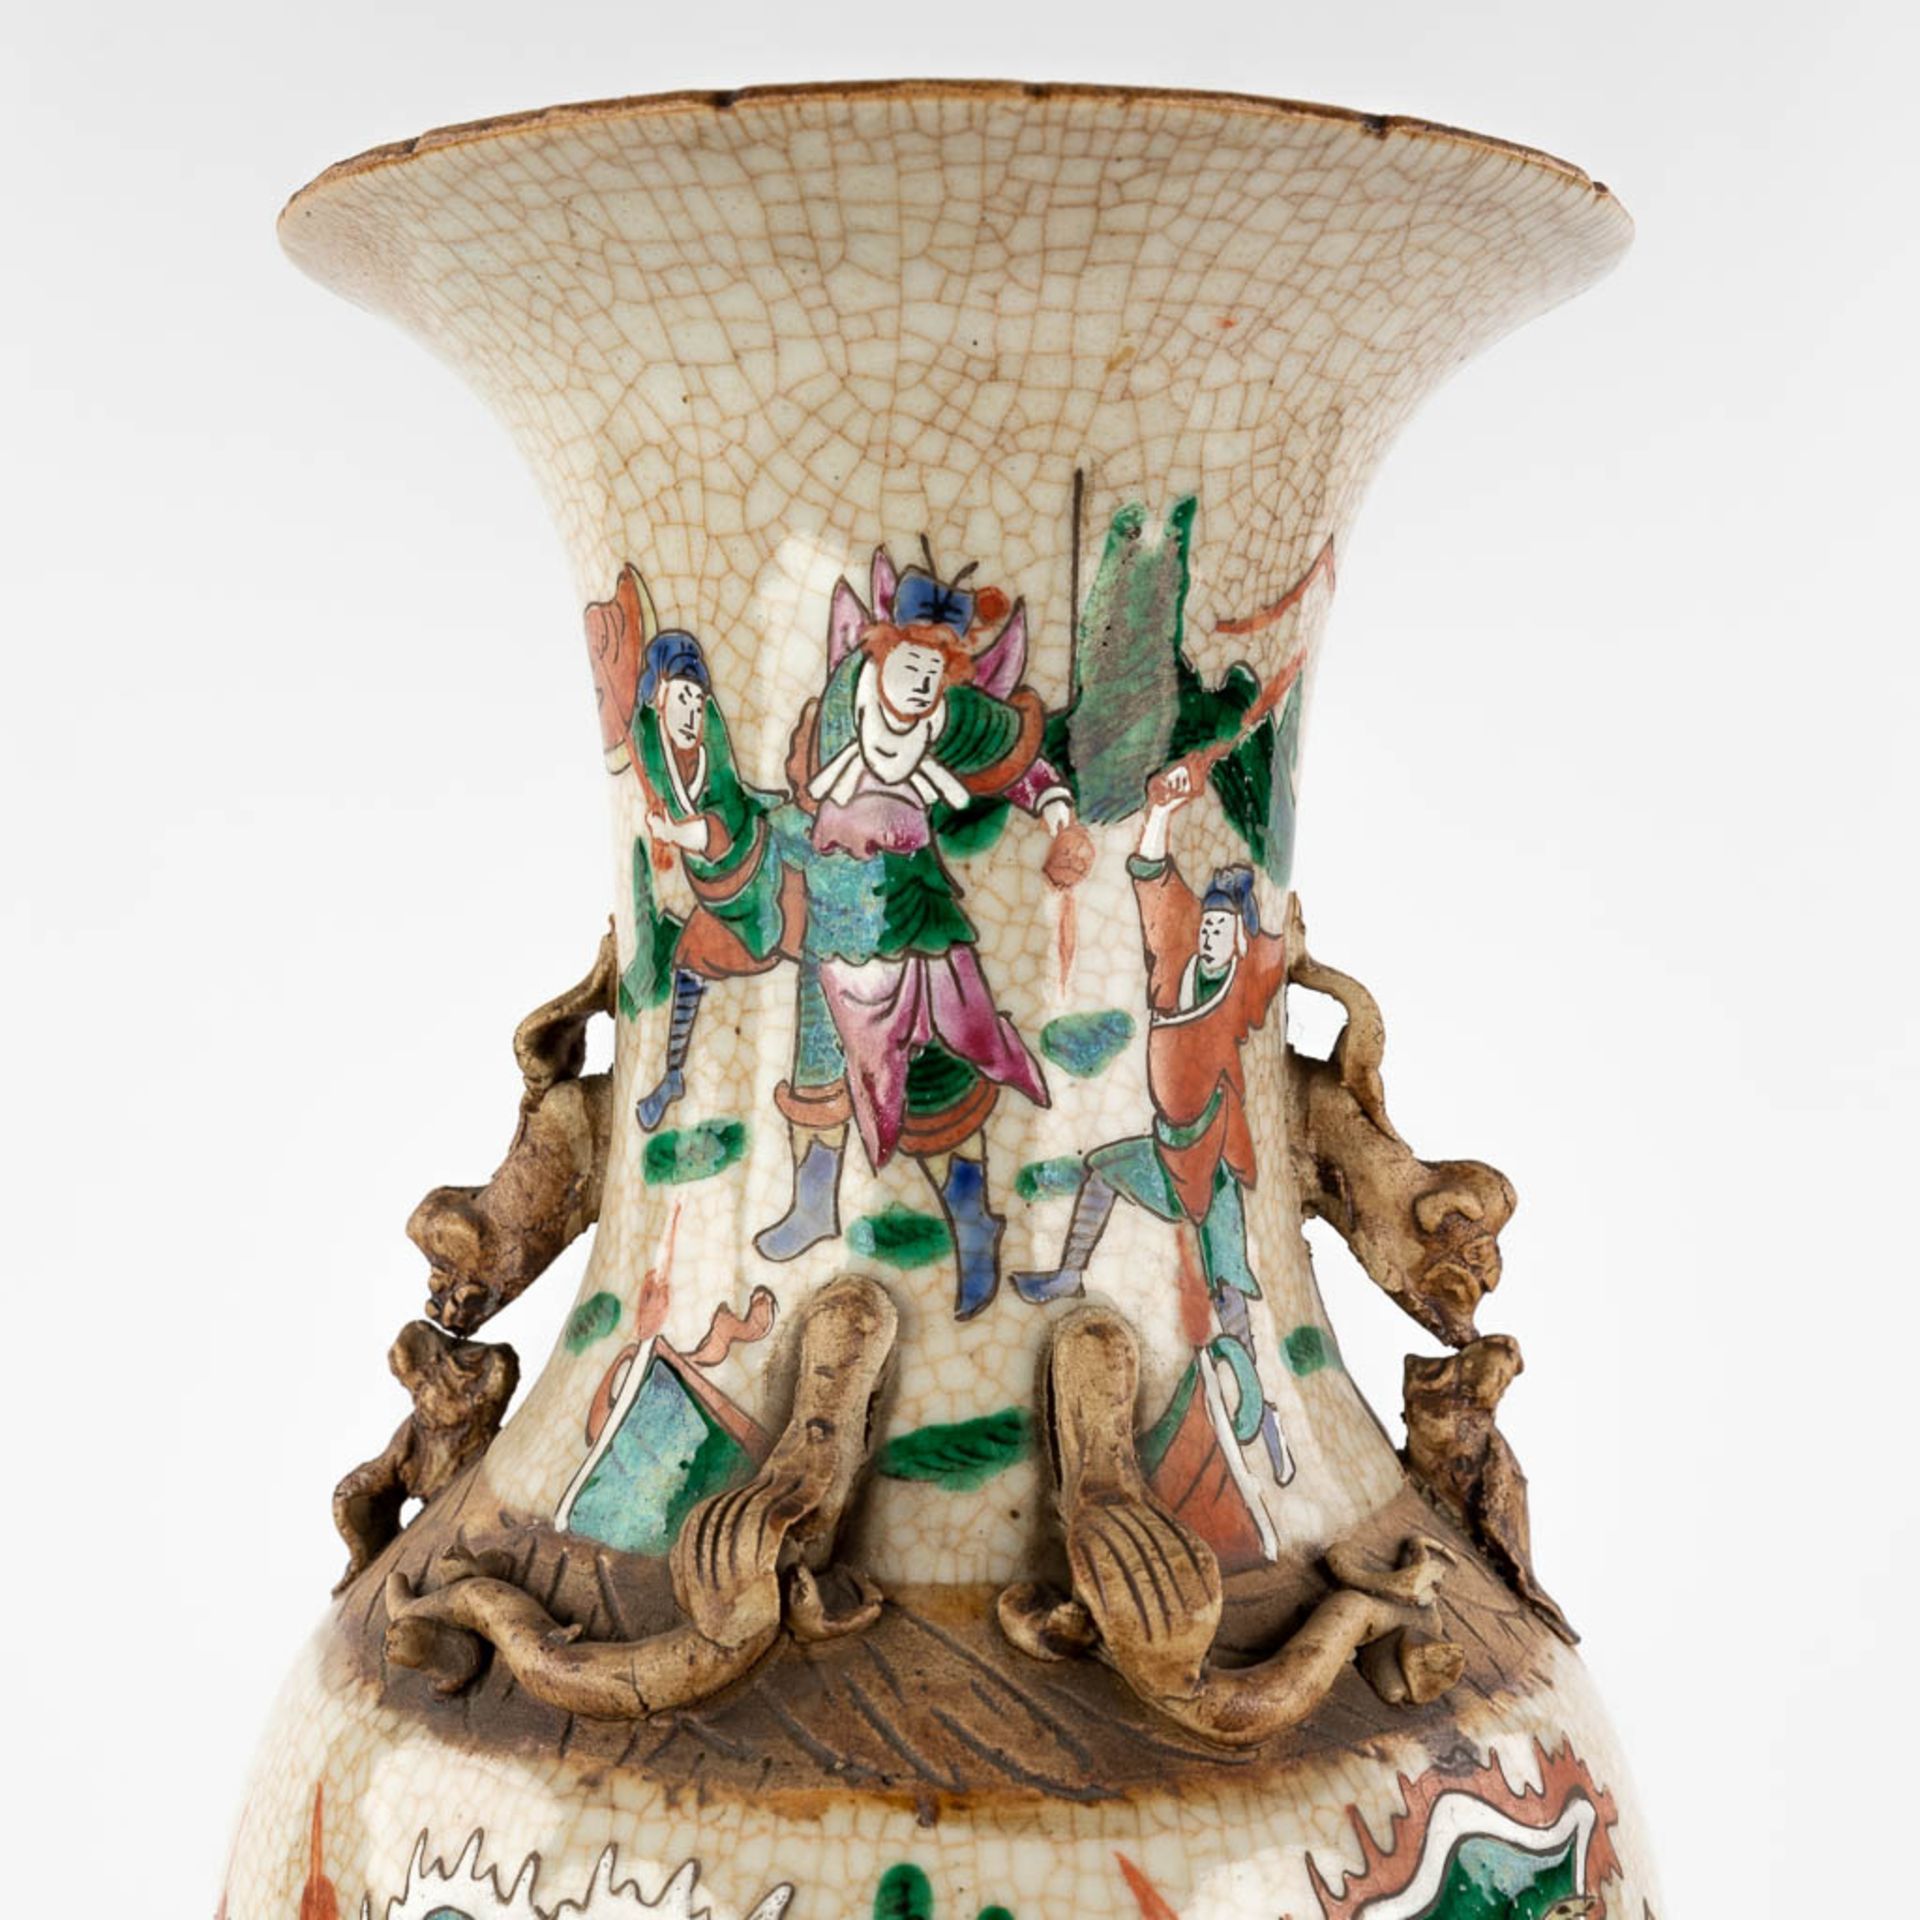 A large Chinese Nanking vase, added two smaller vases. 20th C. (H:58 x D:22 cm) - Image 13 of 25